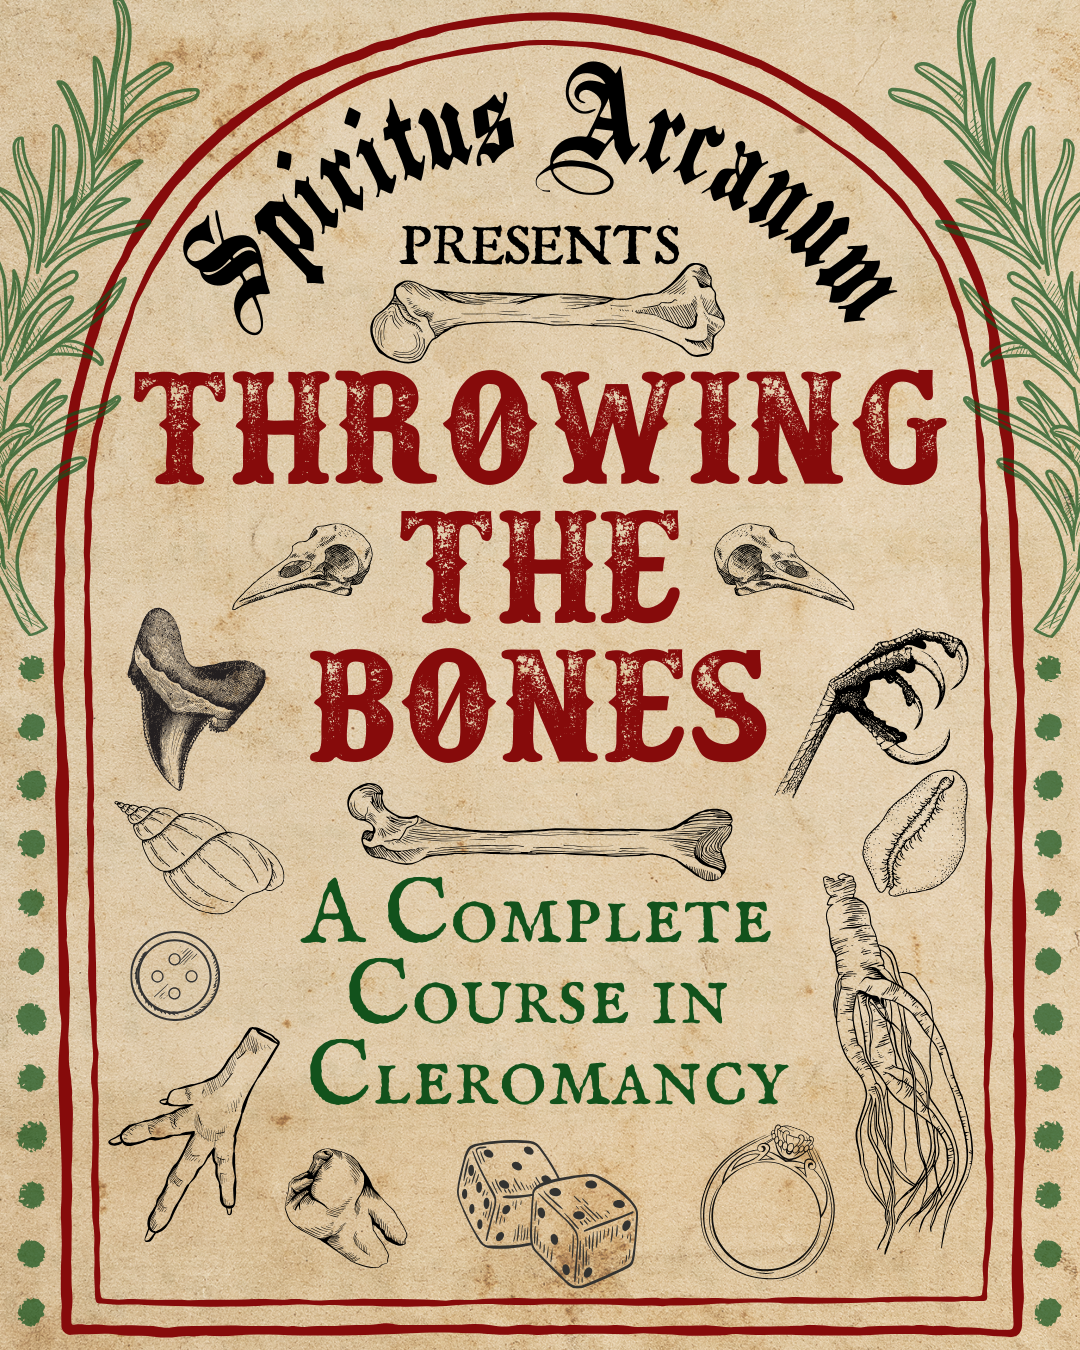 Throwing the Bones: A Complete Course in Osteomancy (Kit Included)